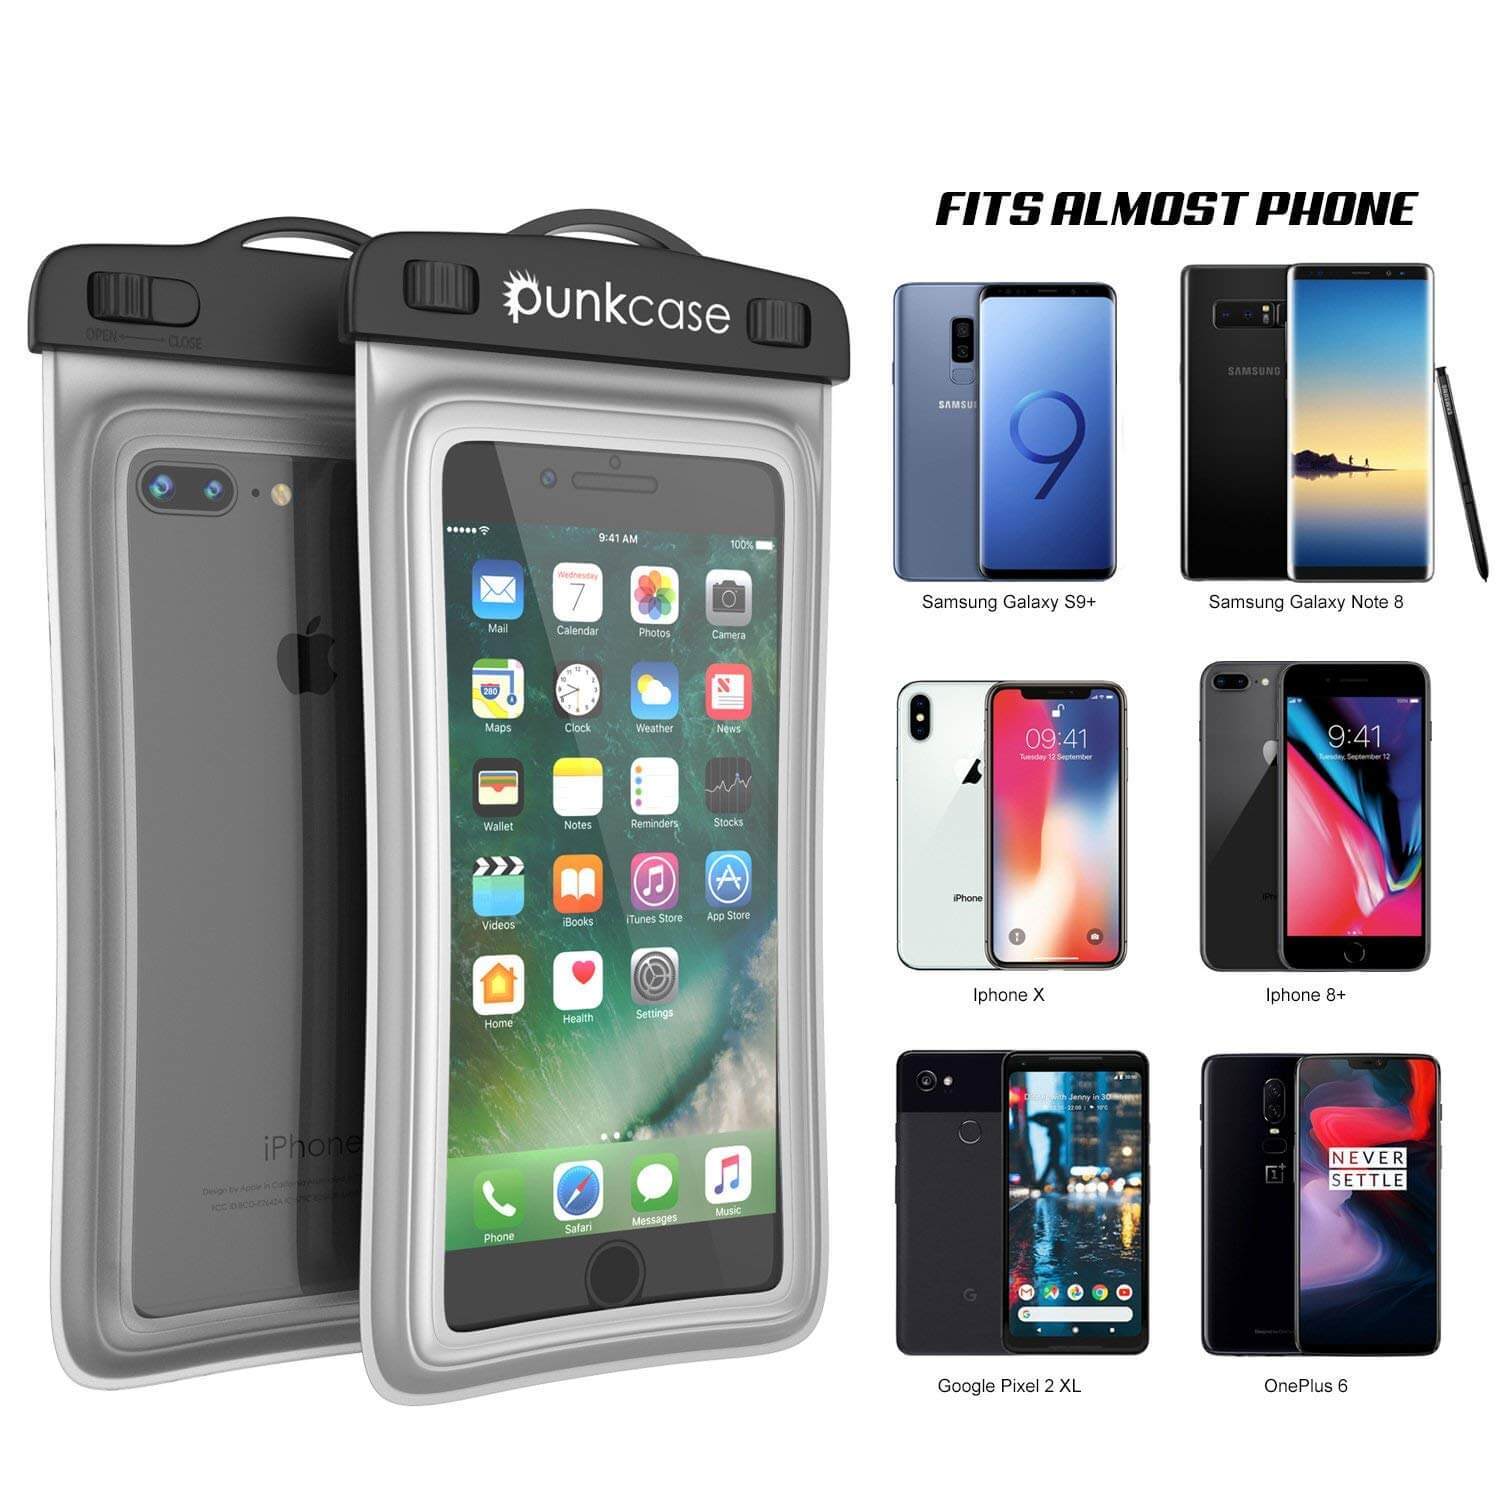 Waterproof Phone Pouch, PunkBag Universal Floating Dry Case Bag for most Cell Phones [Clear] - PunkCase NZ